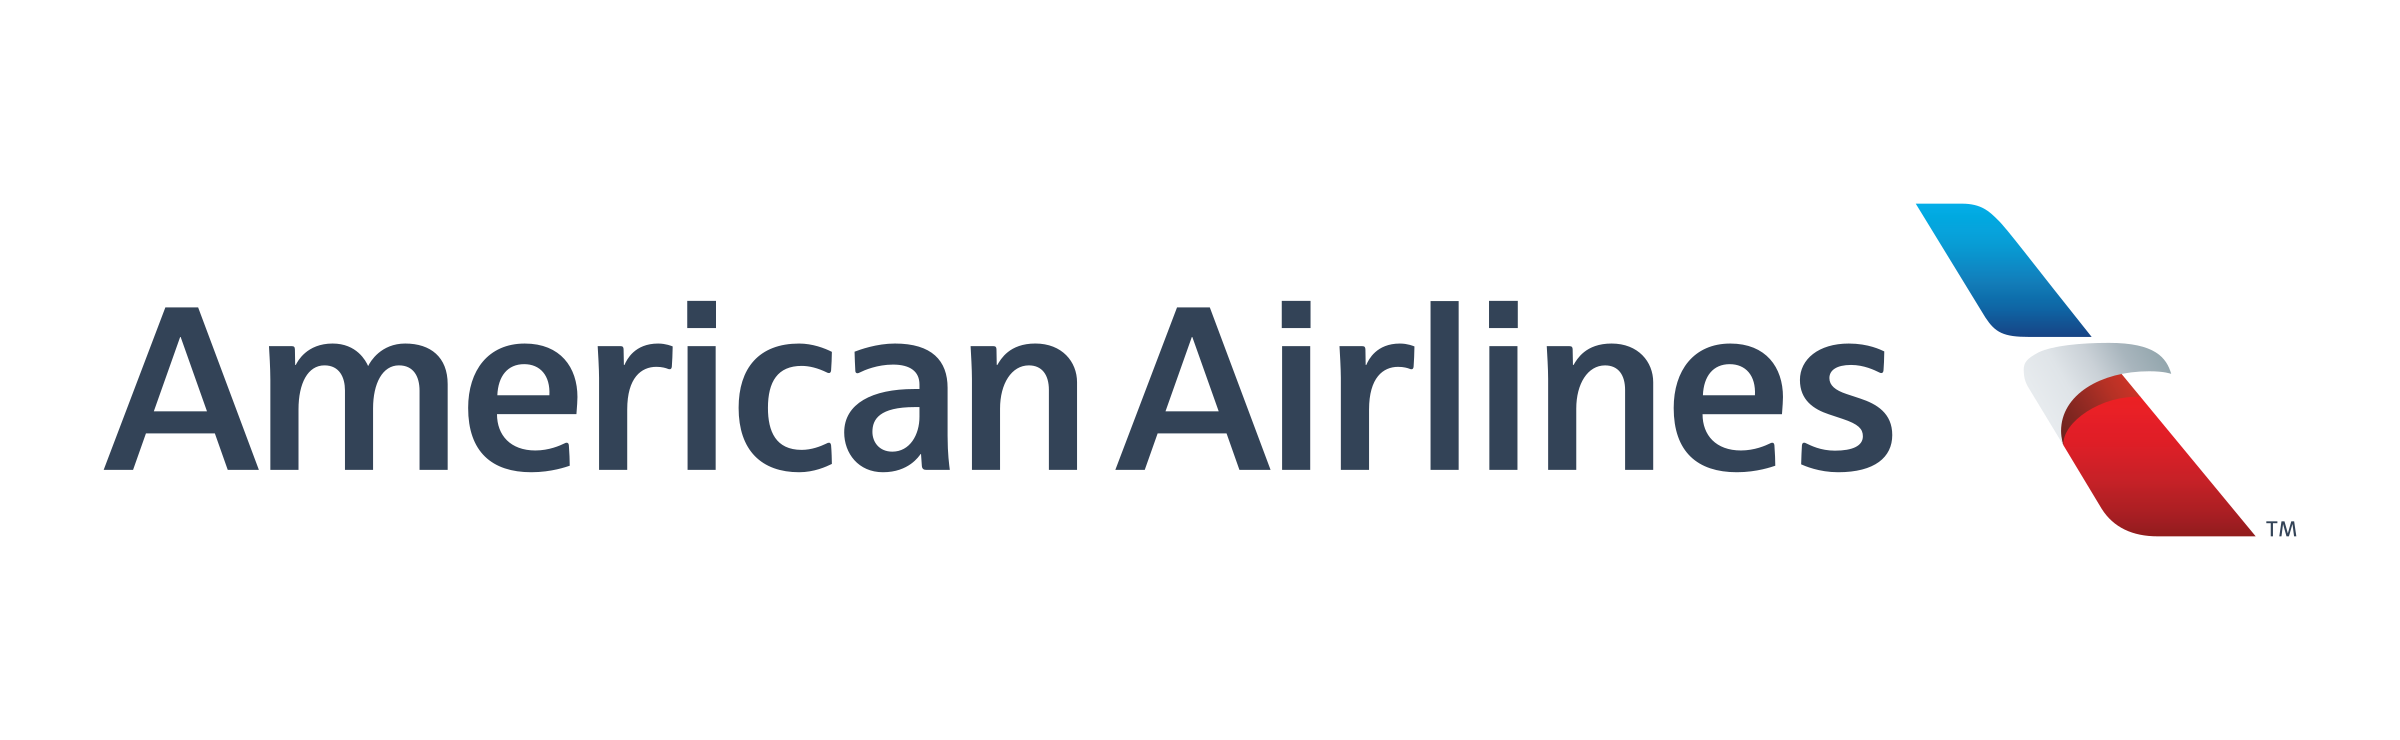 american-airlines-logo-png-transparent.png